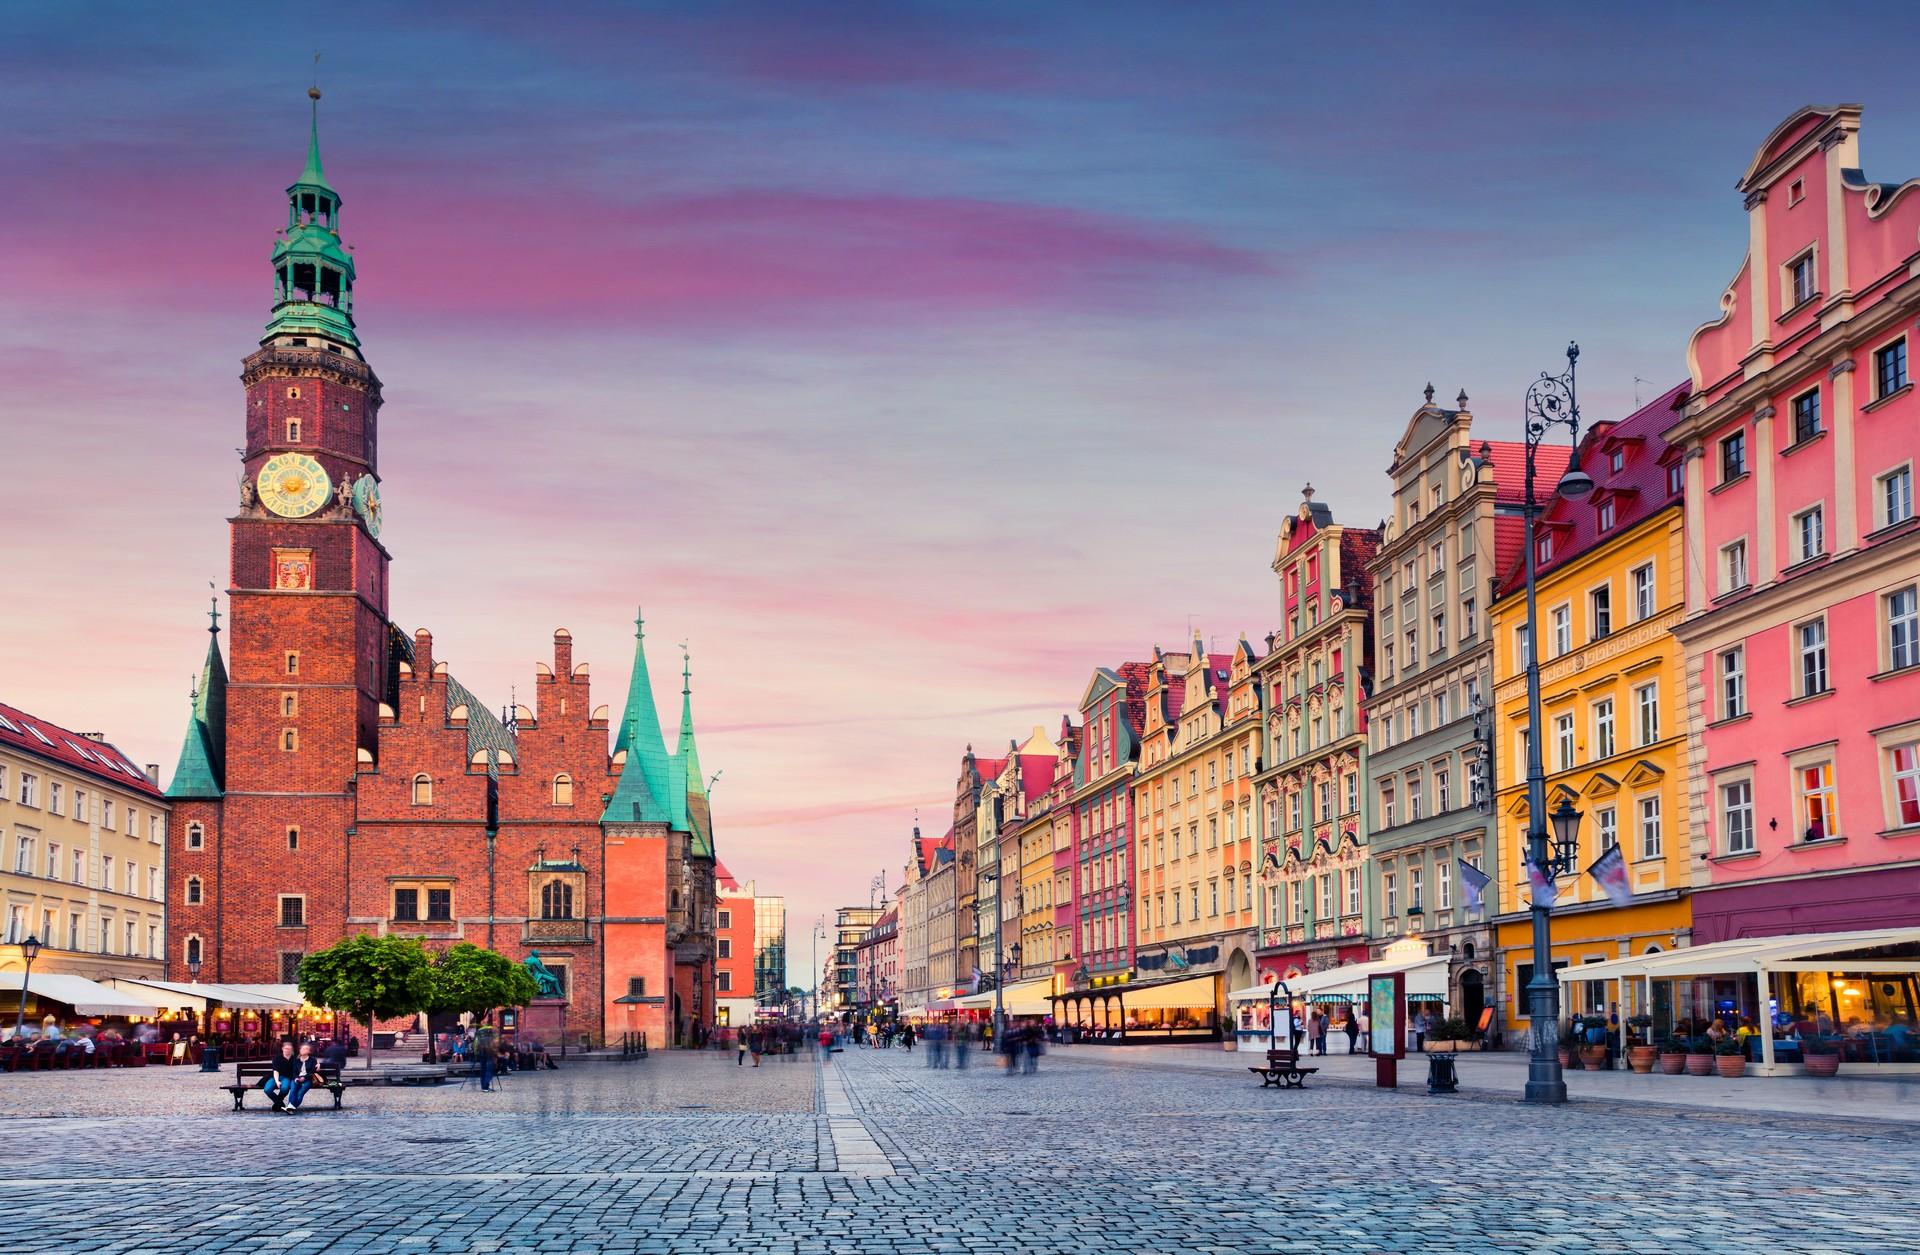 City square in Wrocław at sunset time